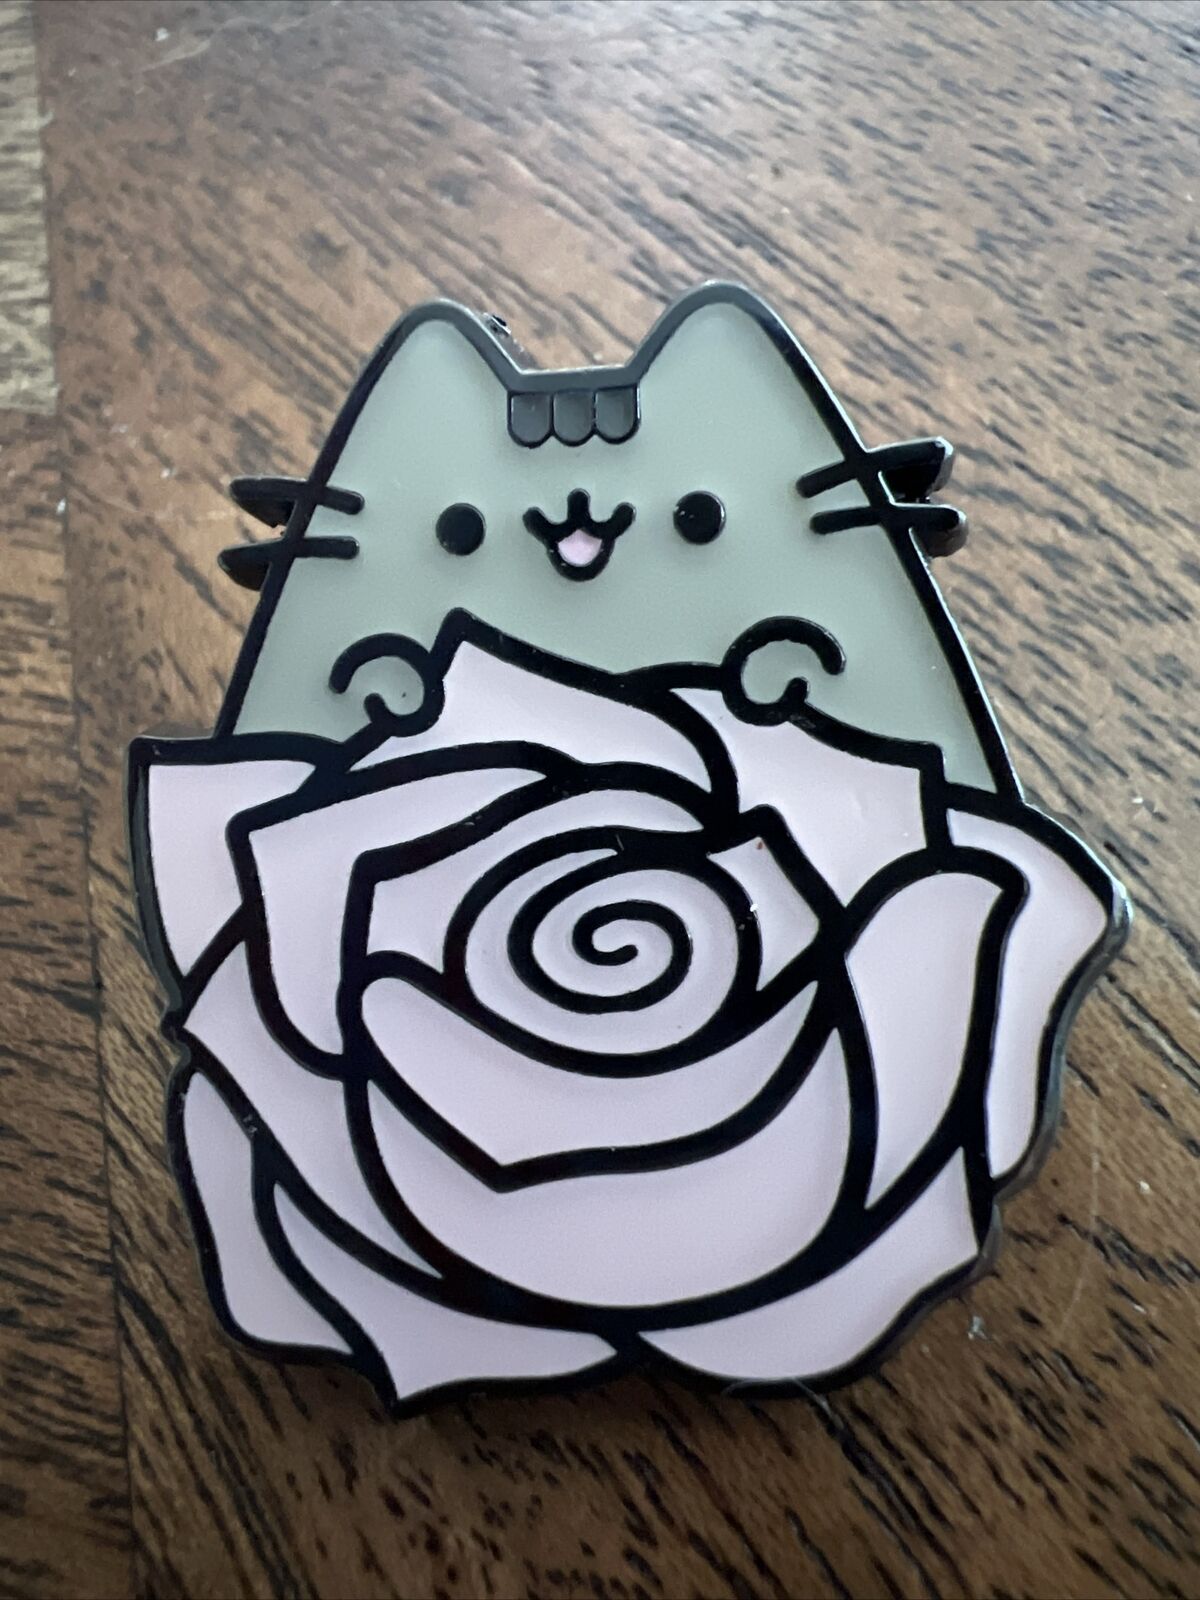 Pusheen Valentines ROSES Enamel Metal PIN Mystery Cat NEW with Box SHIPS FREE